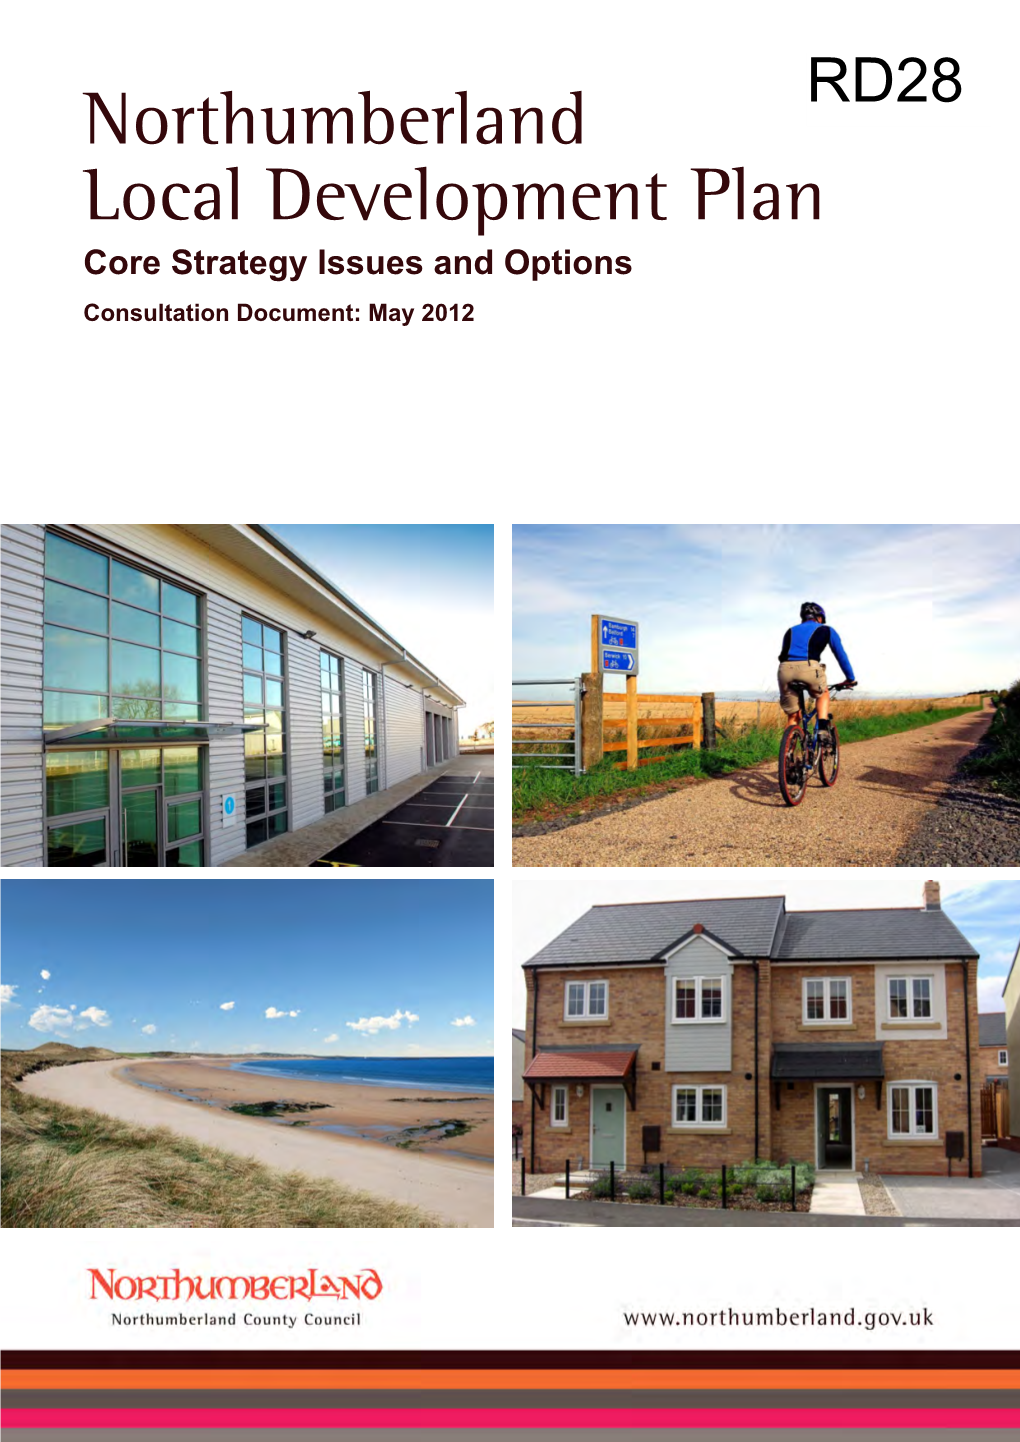 RD27 Northumberland Core Strategy Issues-Options Consultation June 2012